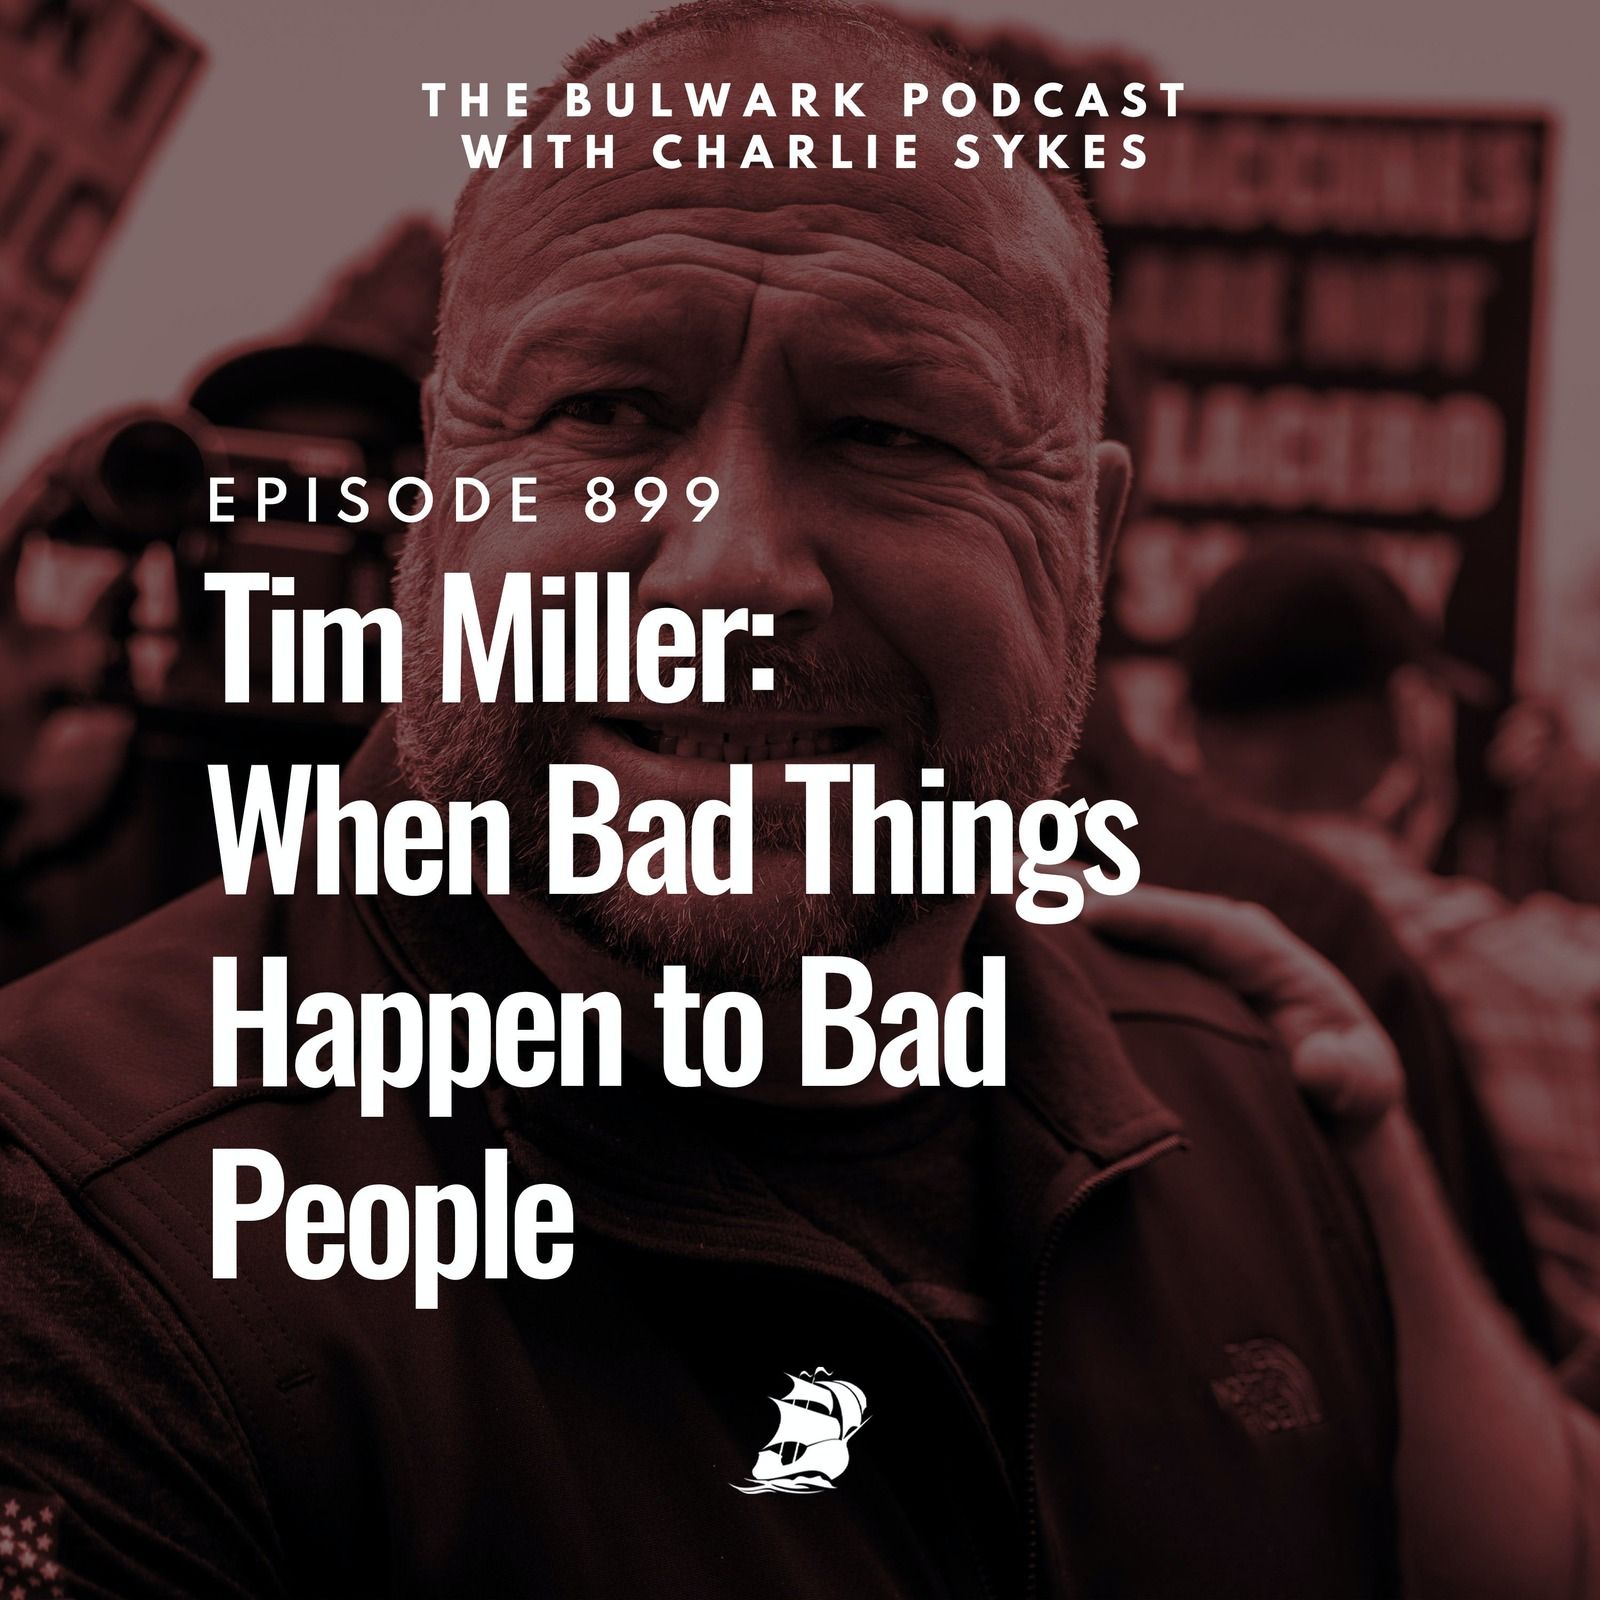 Tim Miller: When Bad Things Happen to Bad People by The Bulwark Podcast